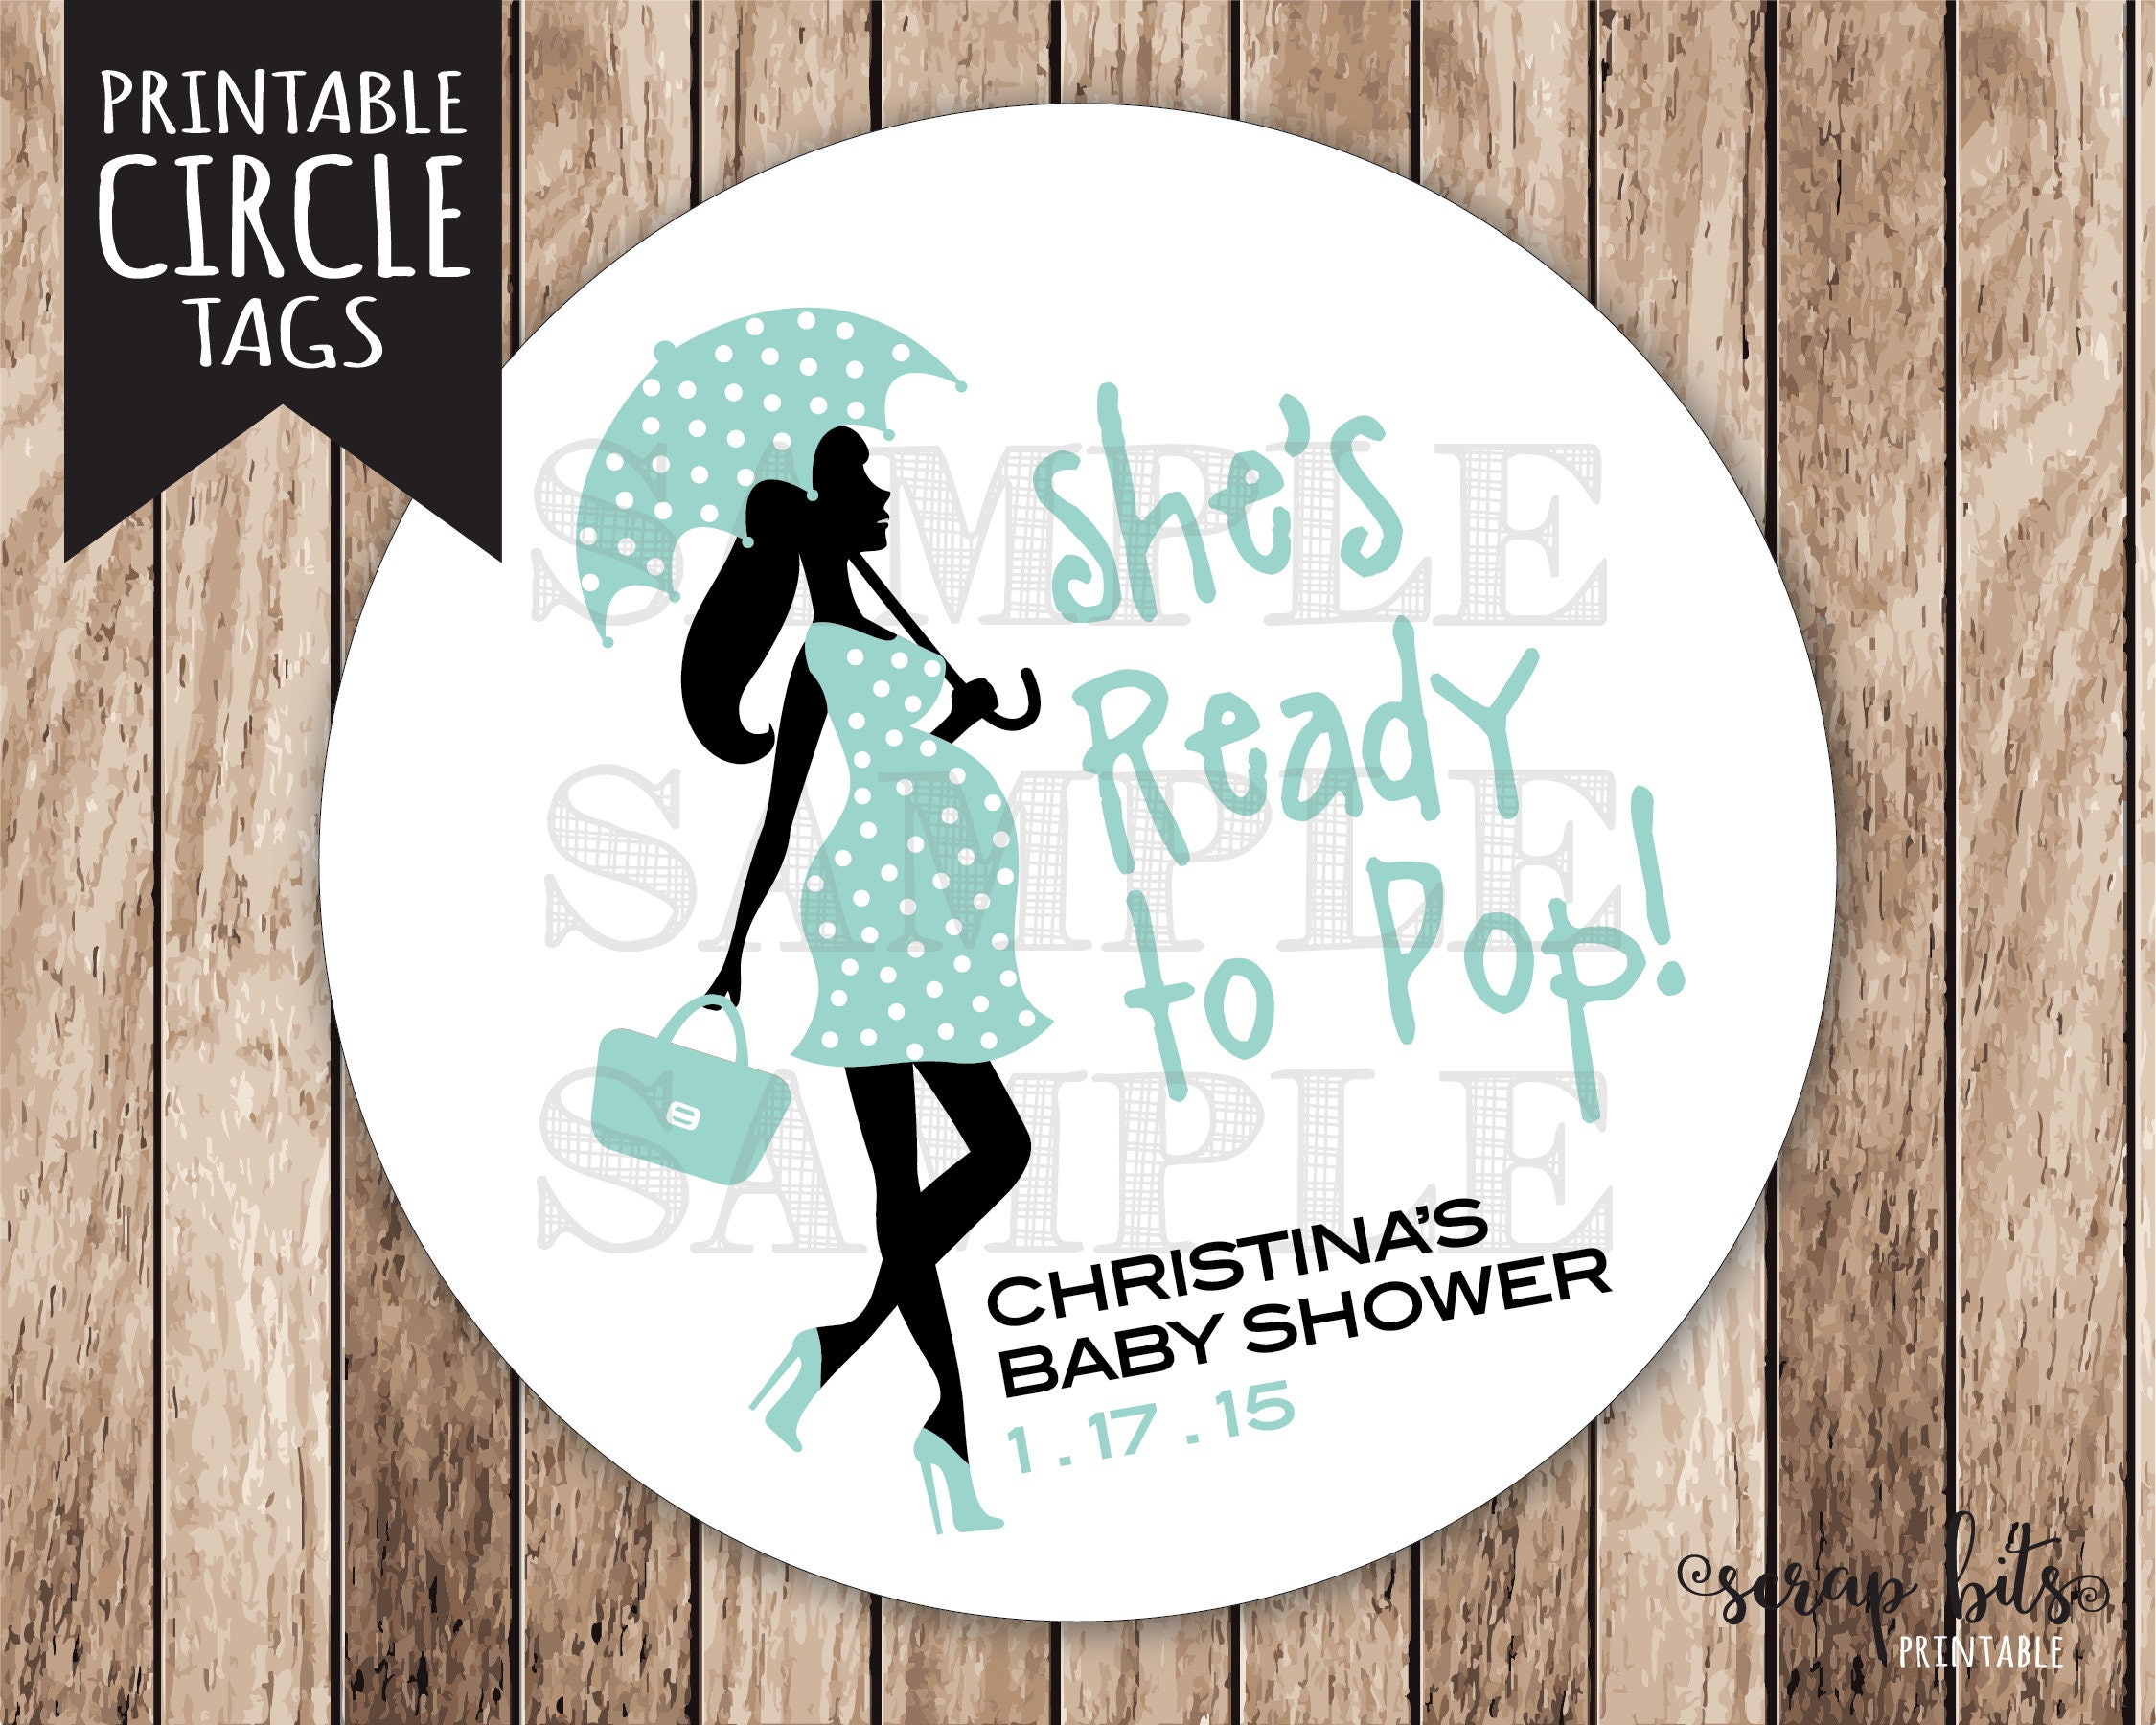 Printable Ready to Pop Tags Personalized Printable Ready